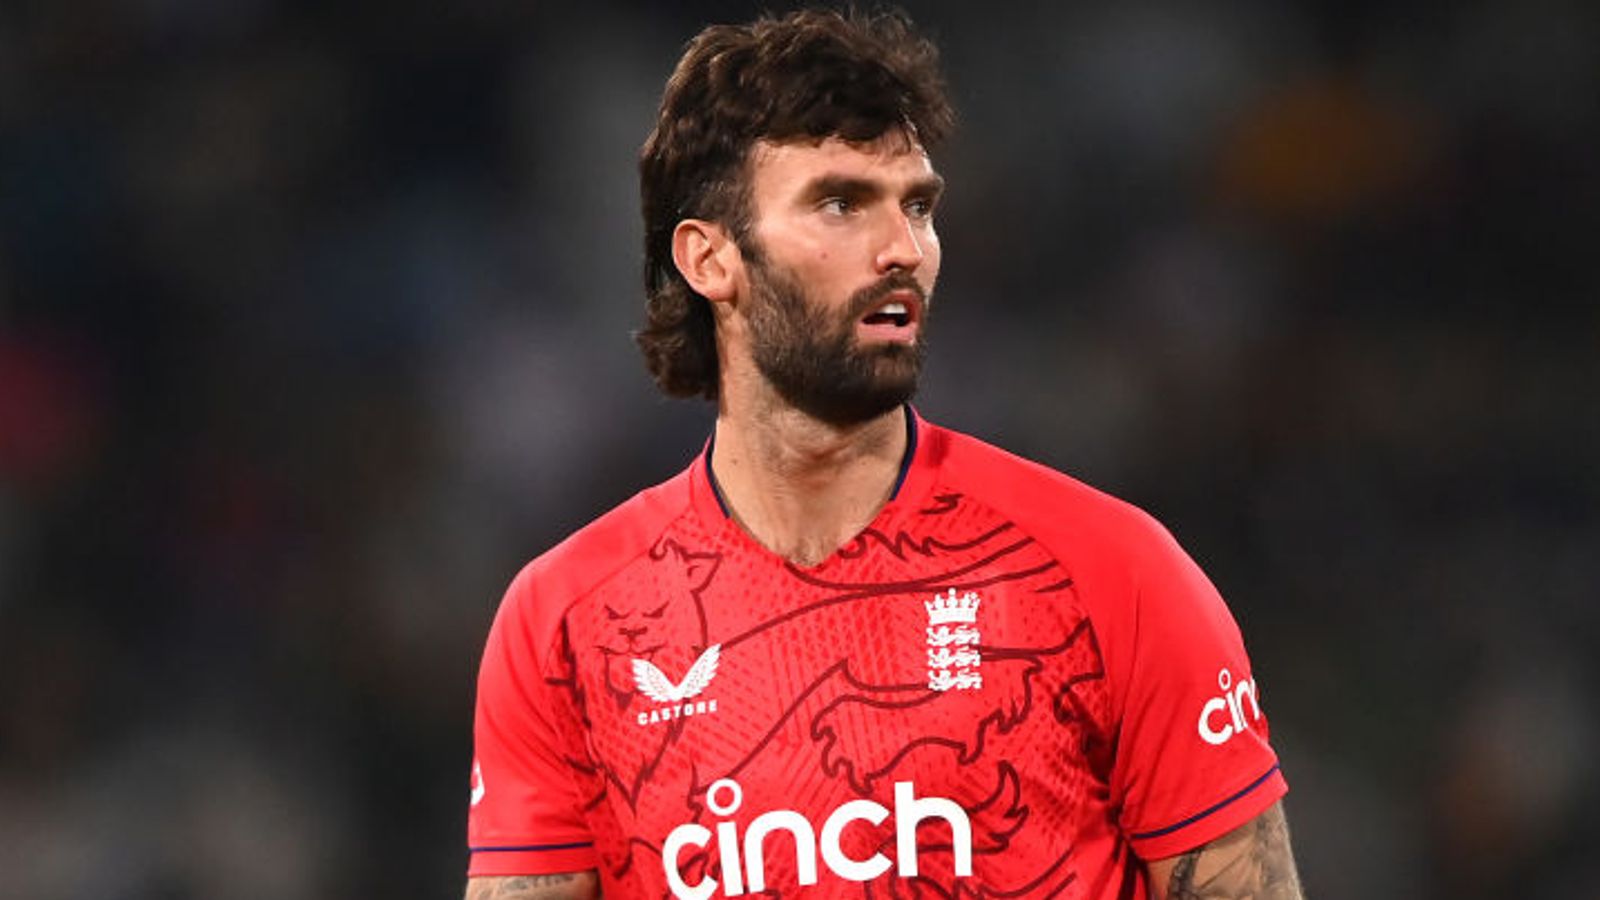 reece-topley-blasts-toblerone-boundary-markers-at-t20-world-cup-or-why-is-it-there-purely-for-money